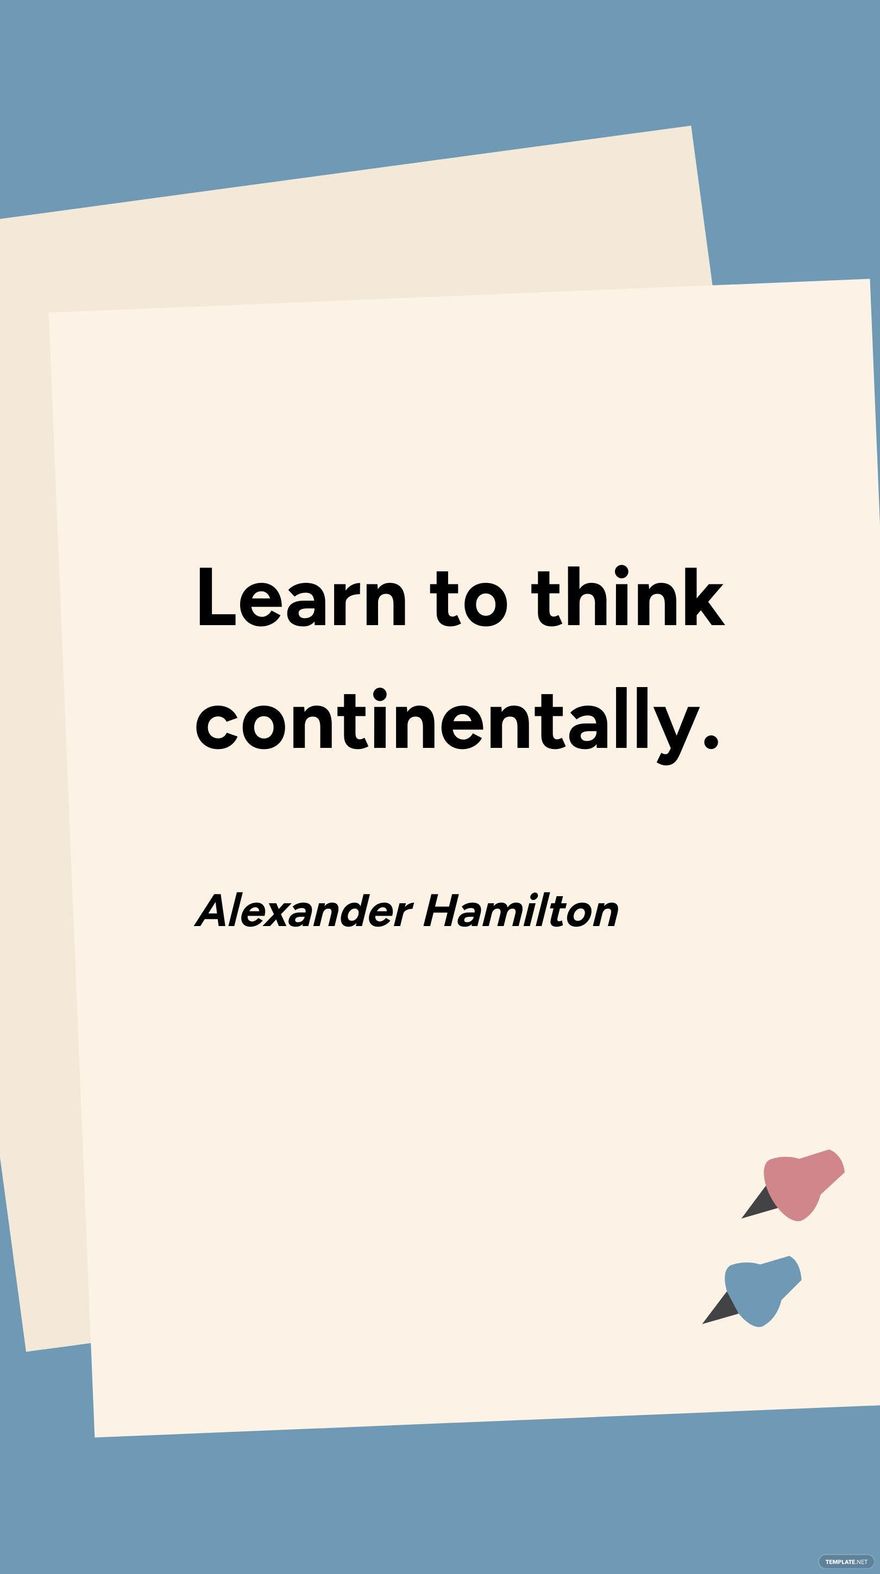 Free Alexander Hamilton - Learn to think continentally. in JPG